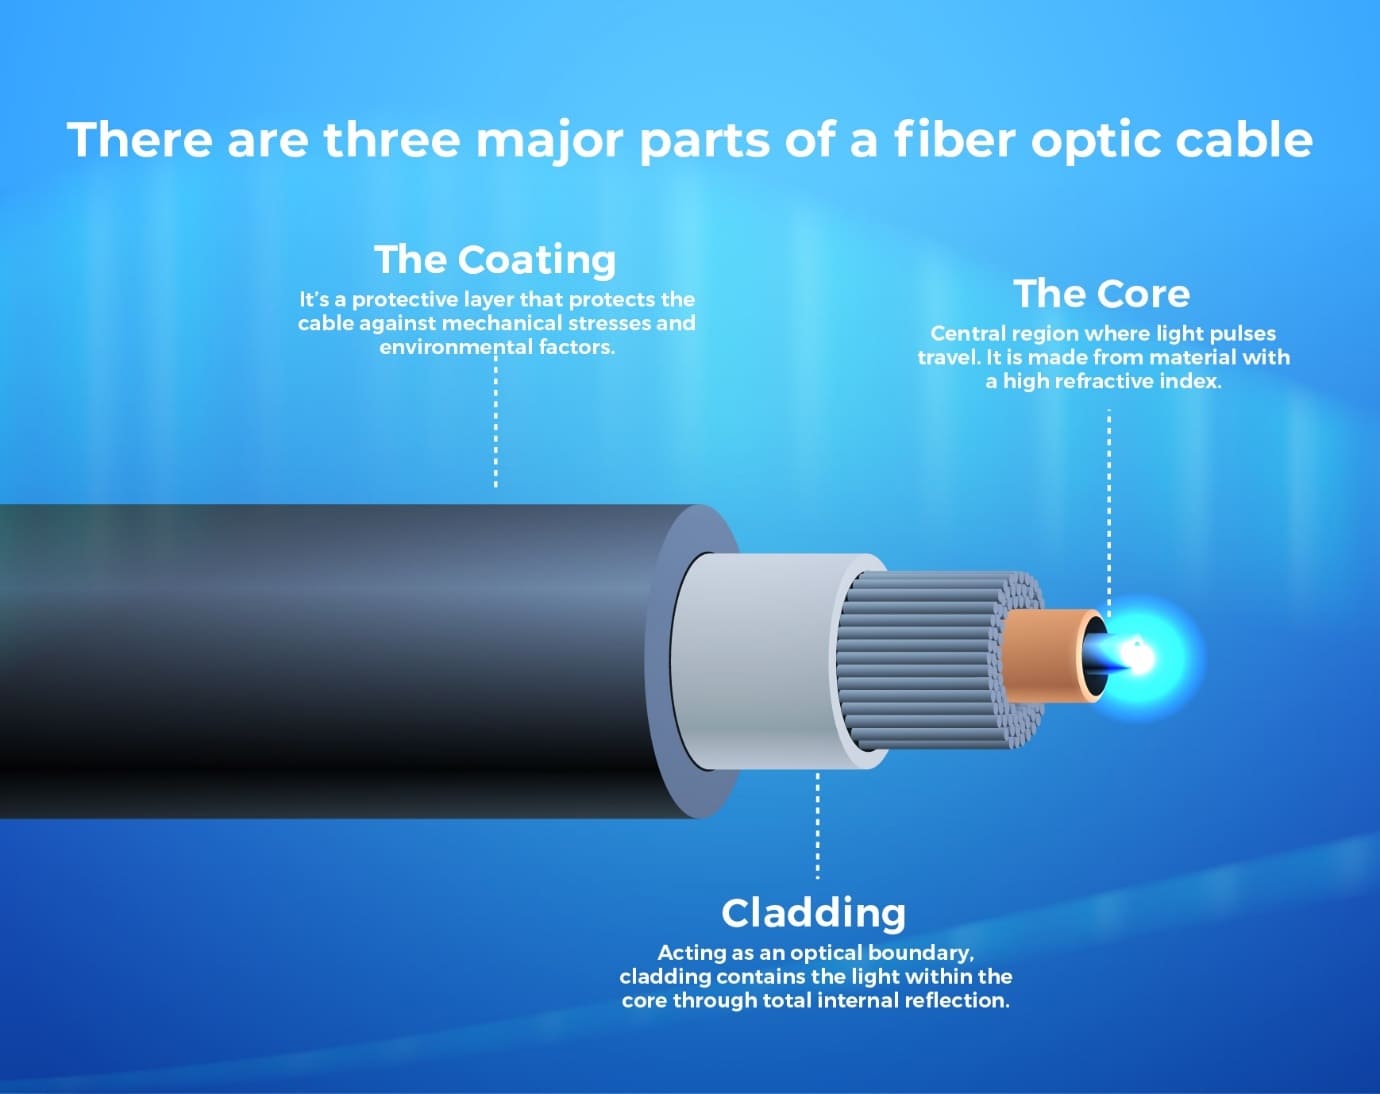 Fiber Optic Cable: Definition, Advantages, and Applications